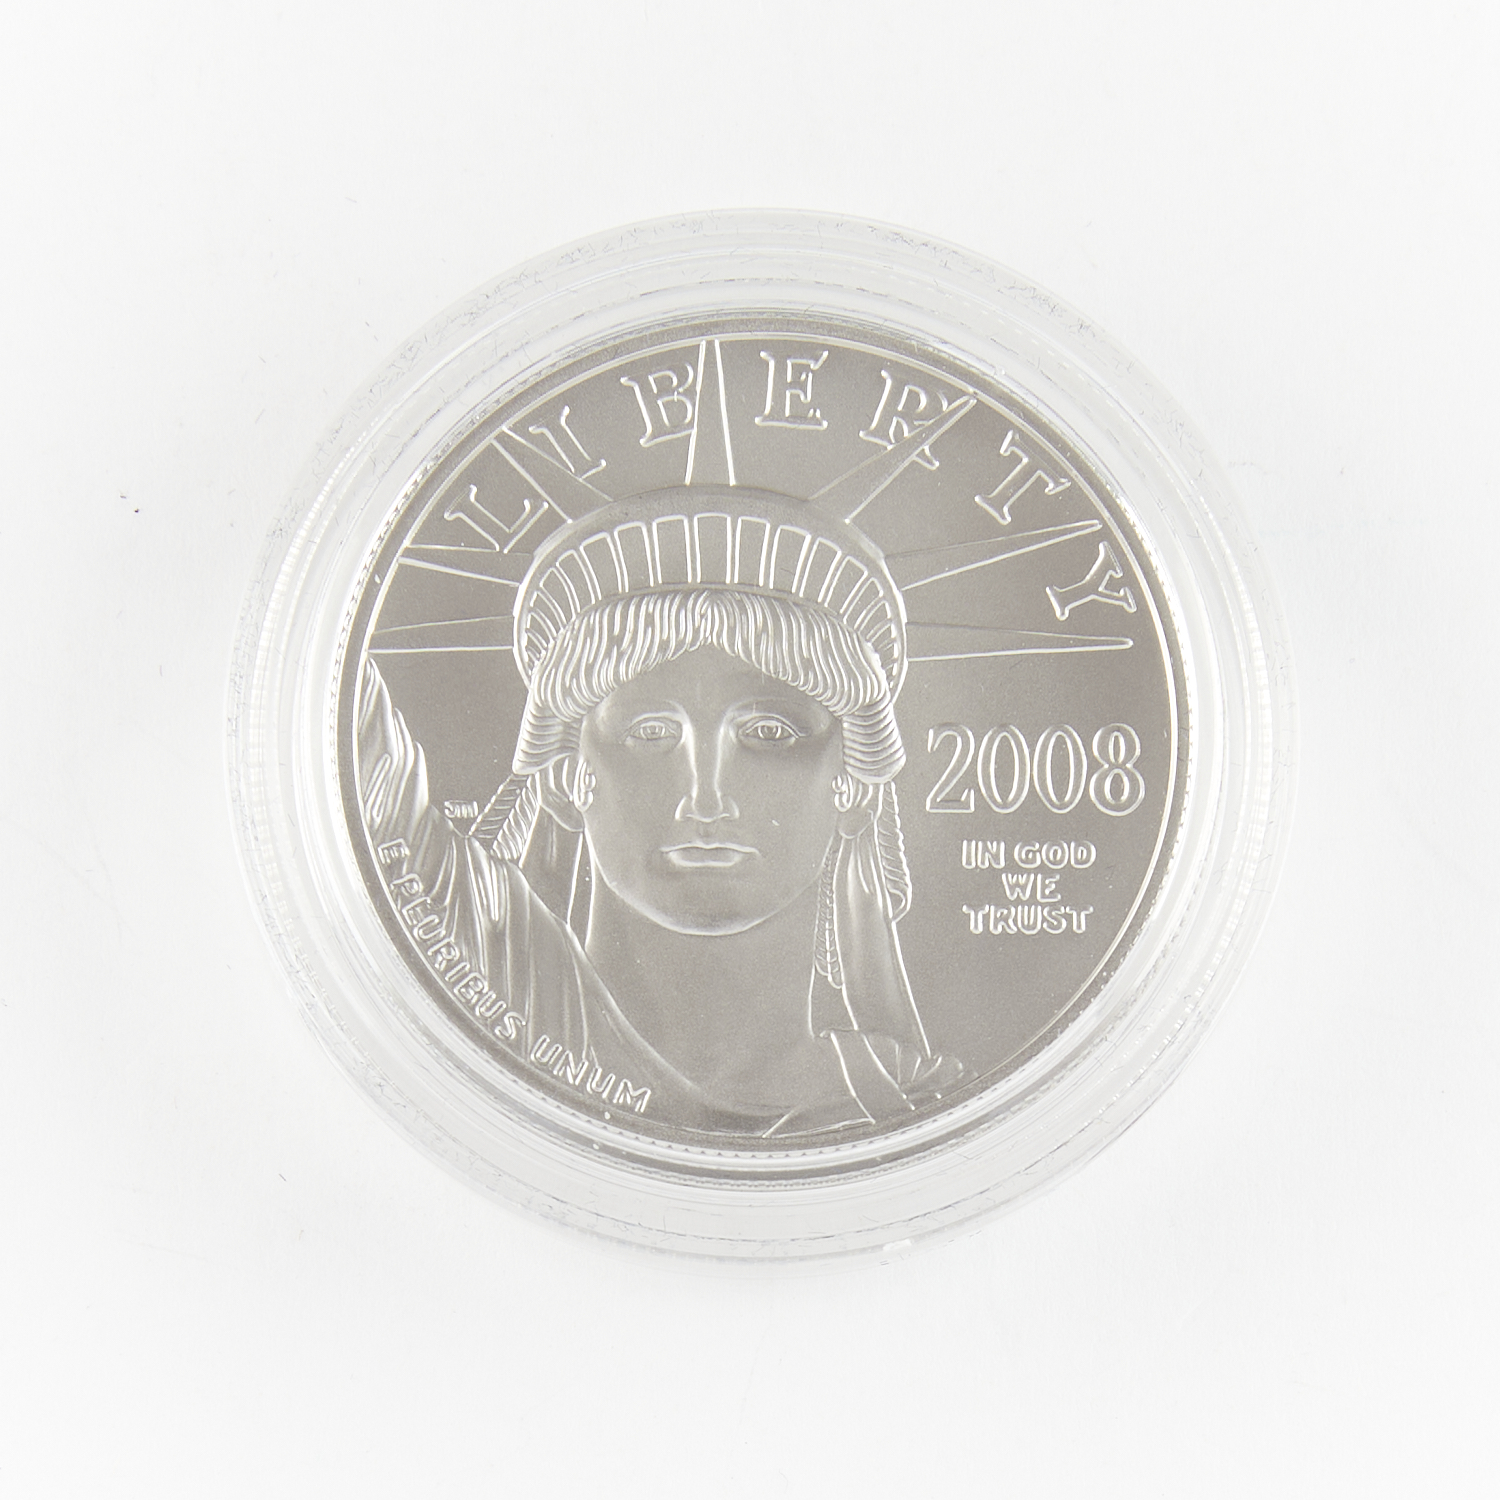 2008 $100 1 oz. Platinum Statue of Liberty Proof Coin - Image 2 of 3